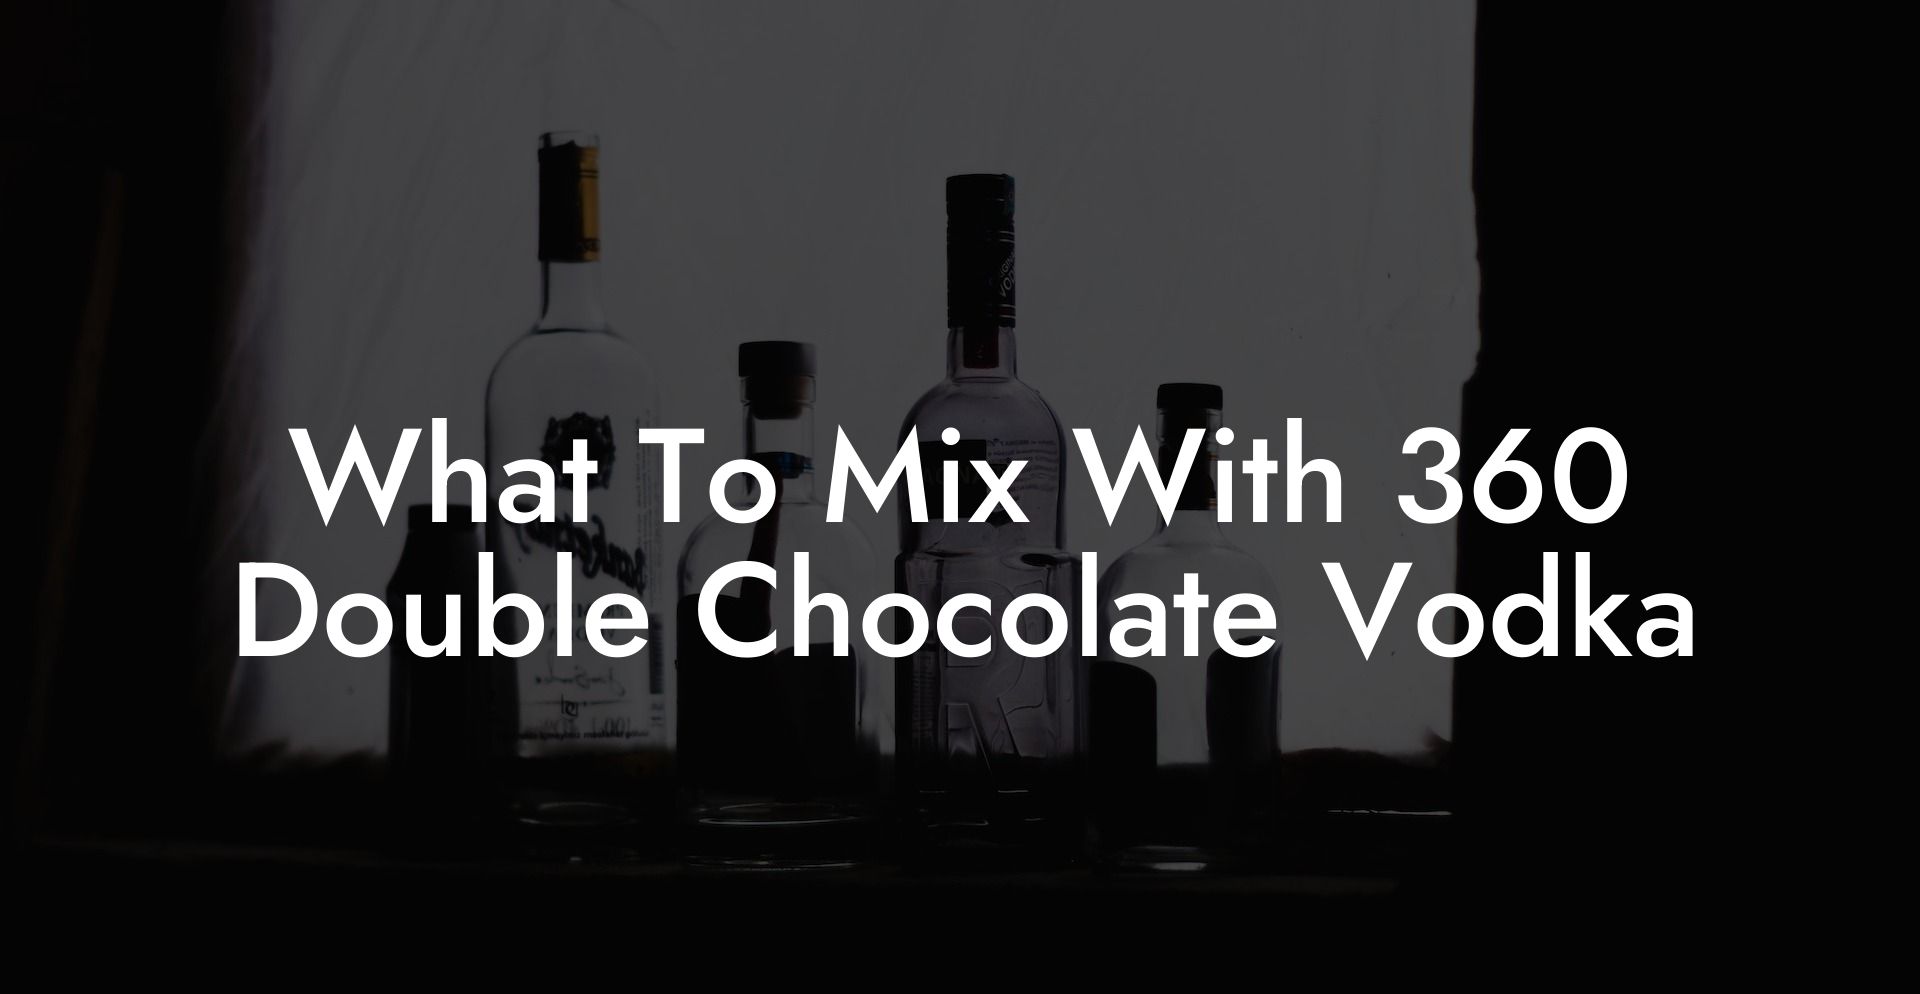 What To Mix With 360 Double Chocolate Vodka